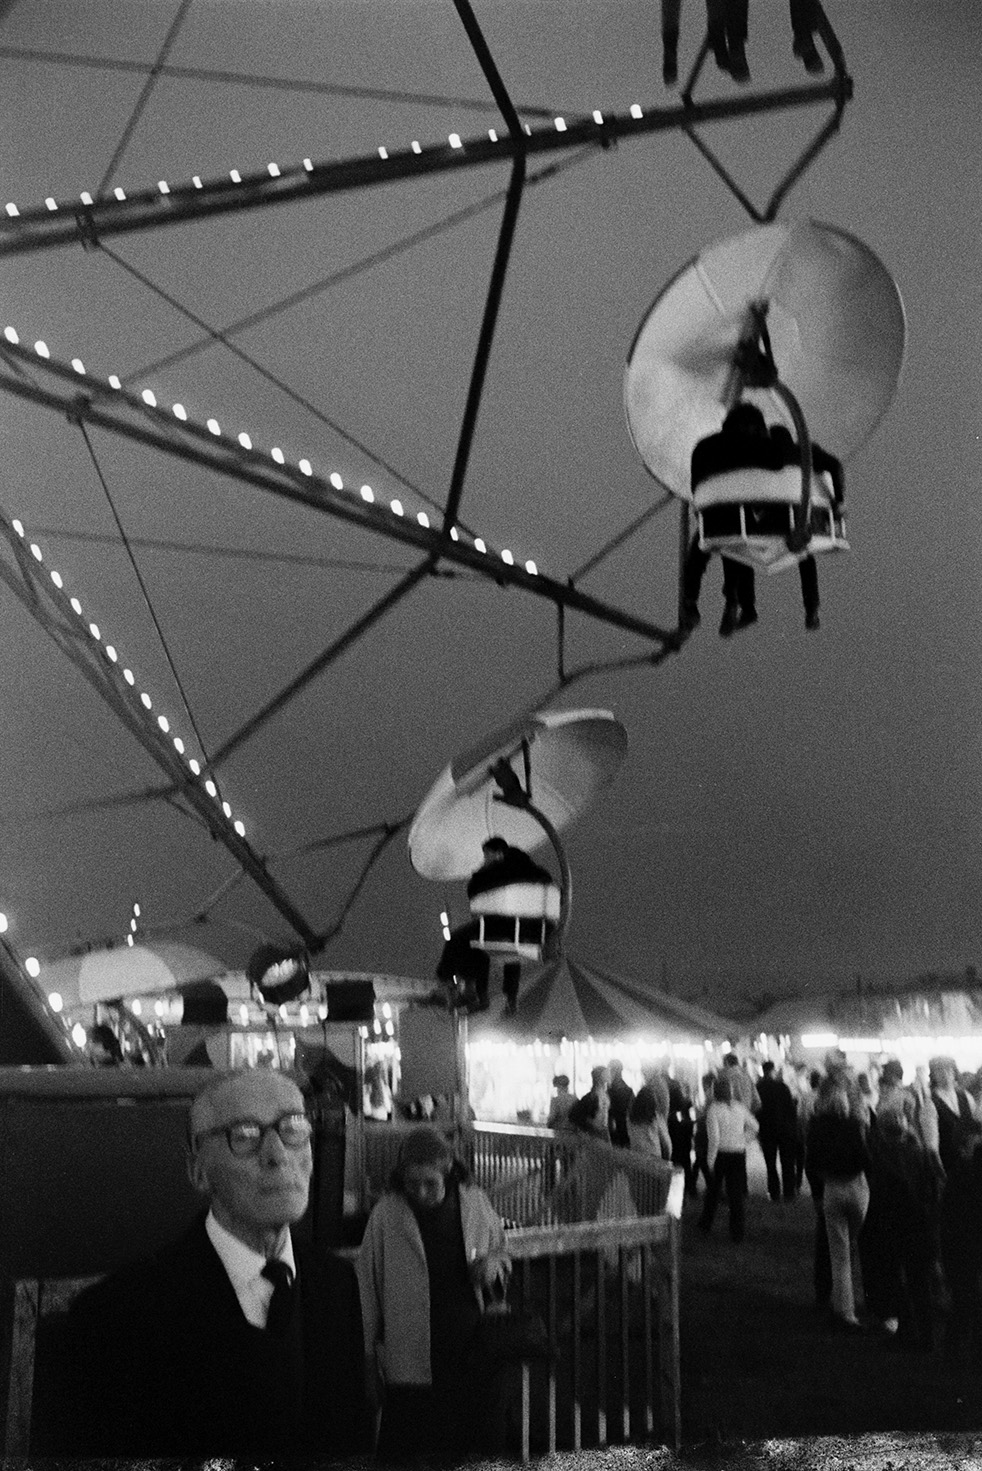 A man and woman stood by a big wheel fairground ride at Barnstaple Fair. Other people and fairground stalls can be seen in the background.